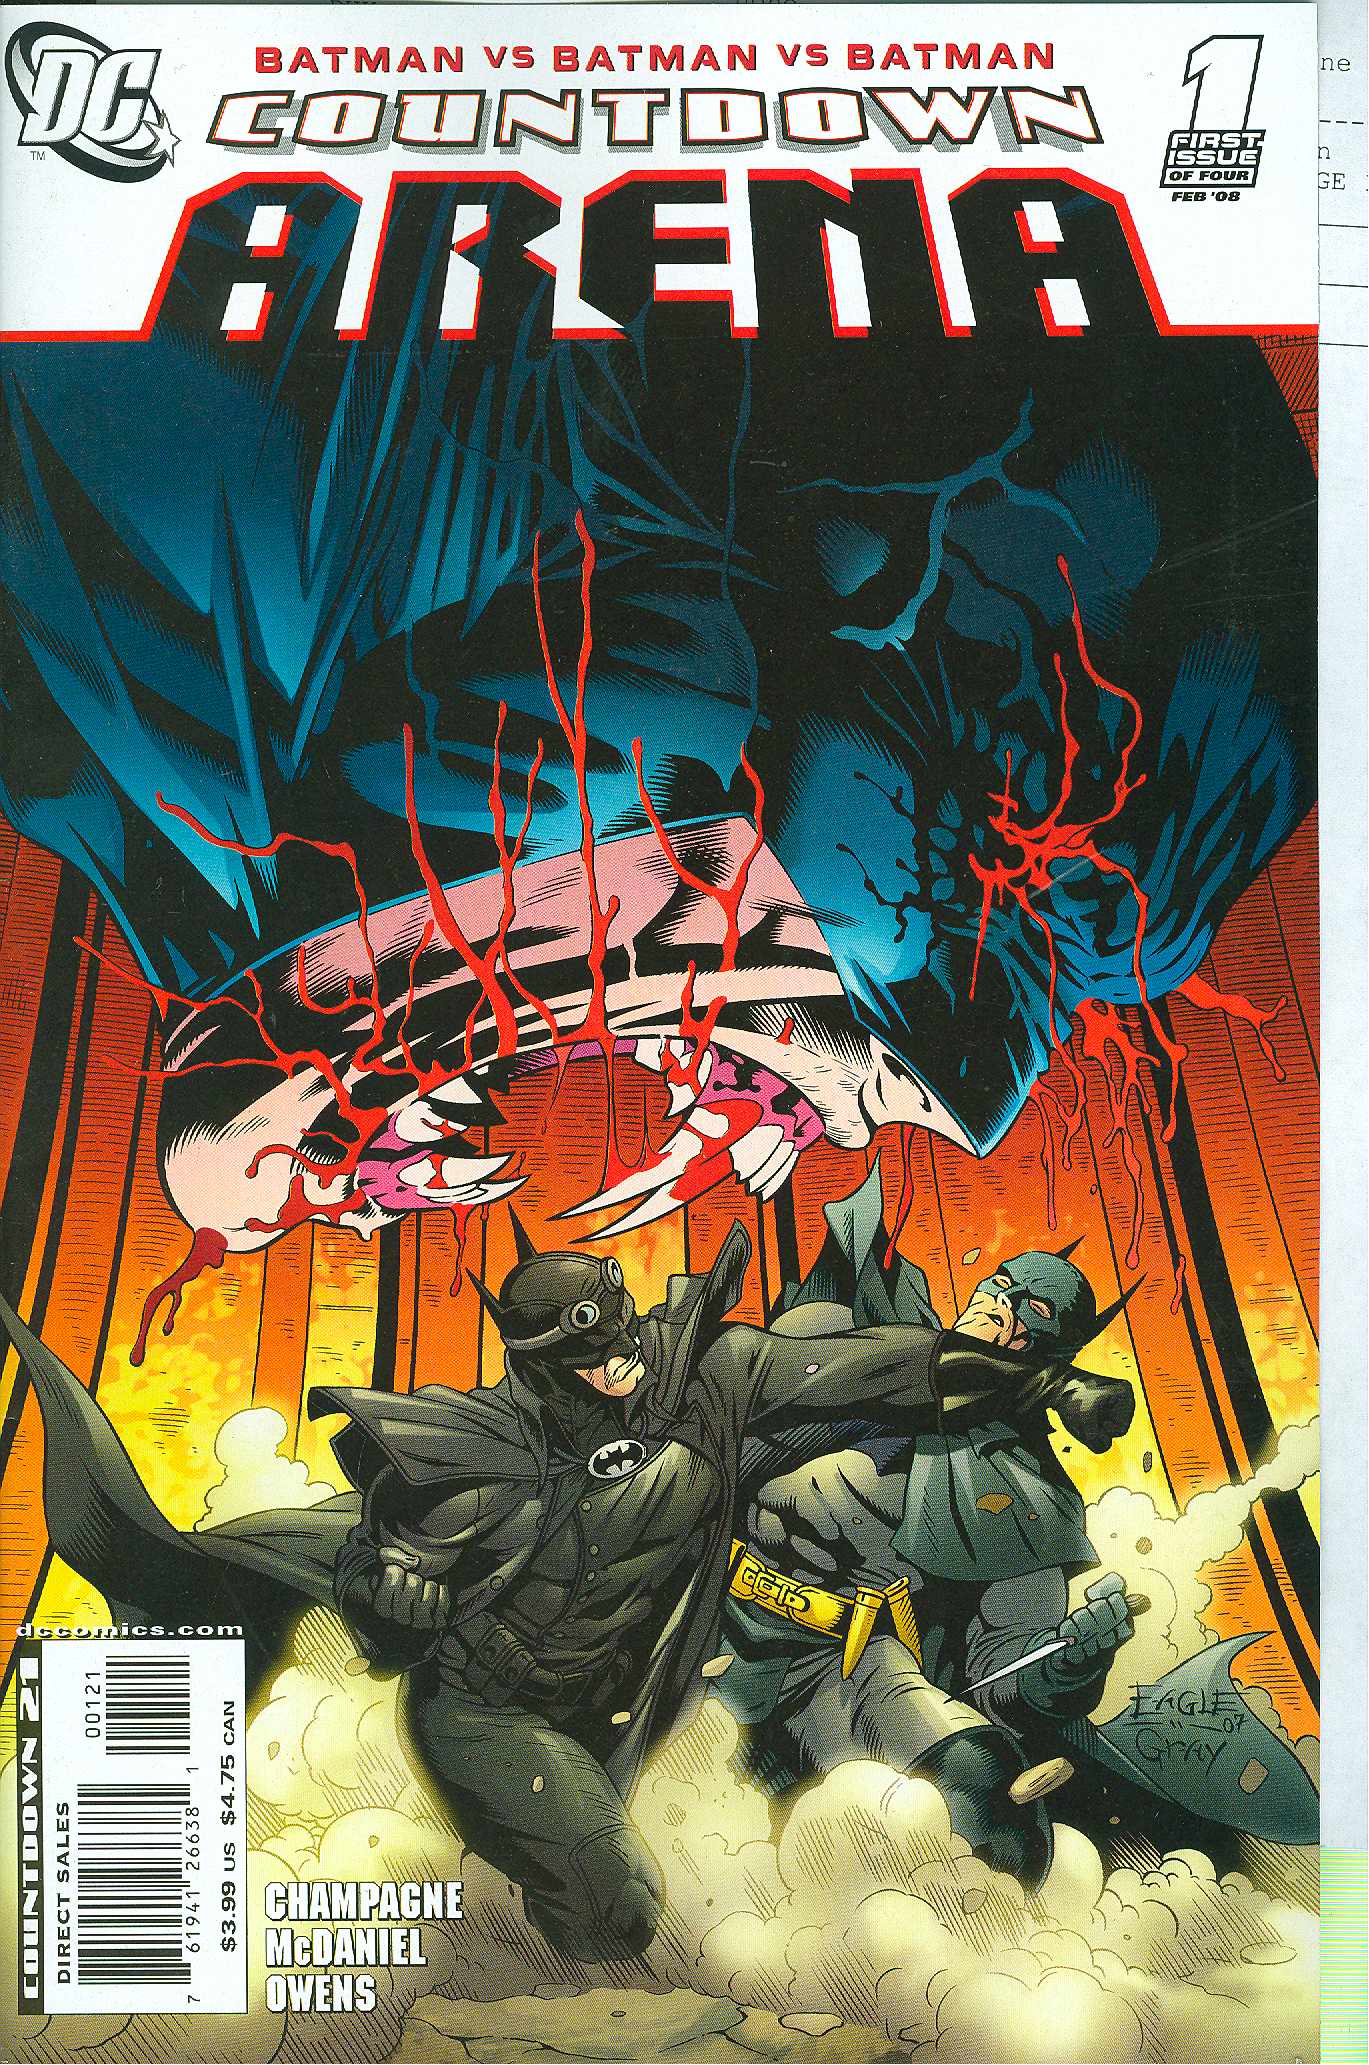 Countdown Arena #1 1 for 10 Incentive Variant Edition (Of 4)